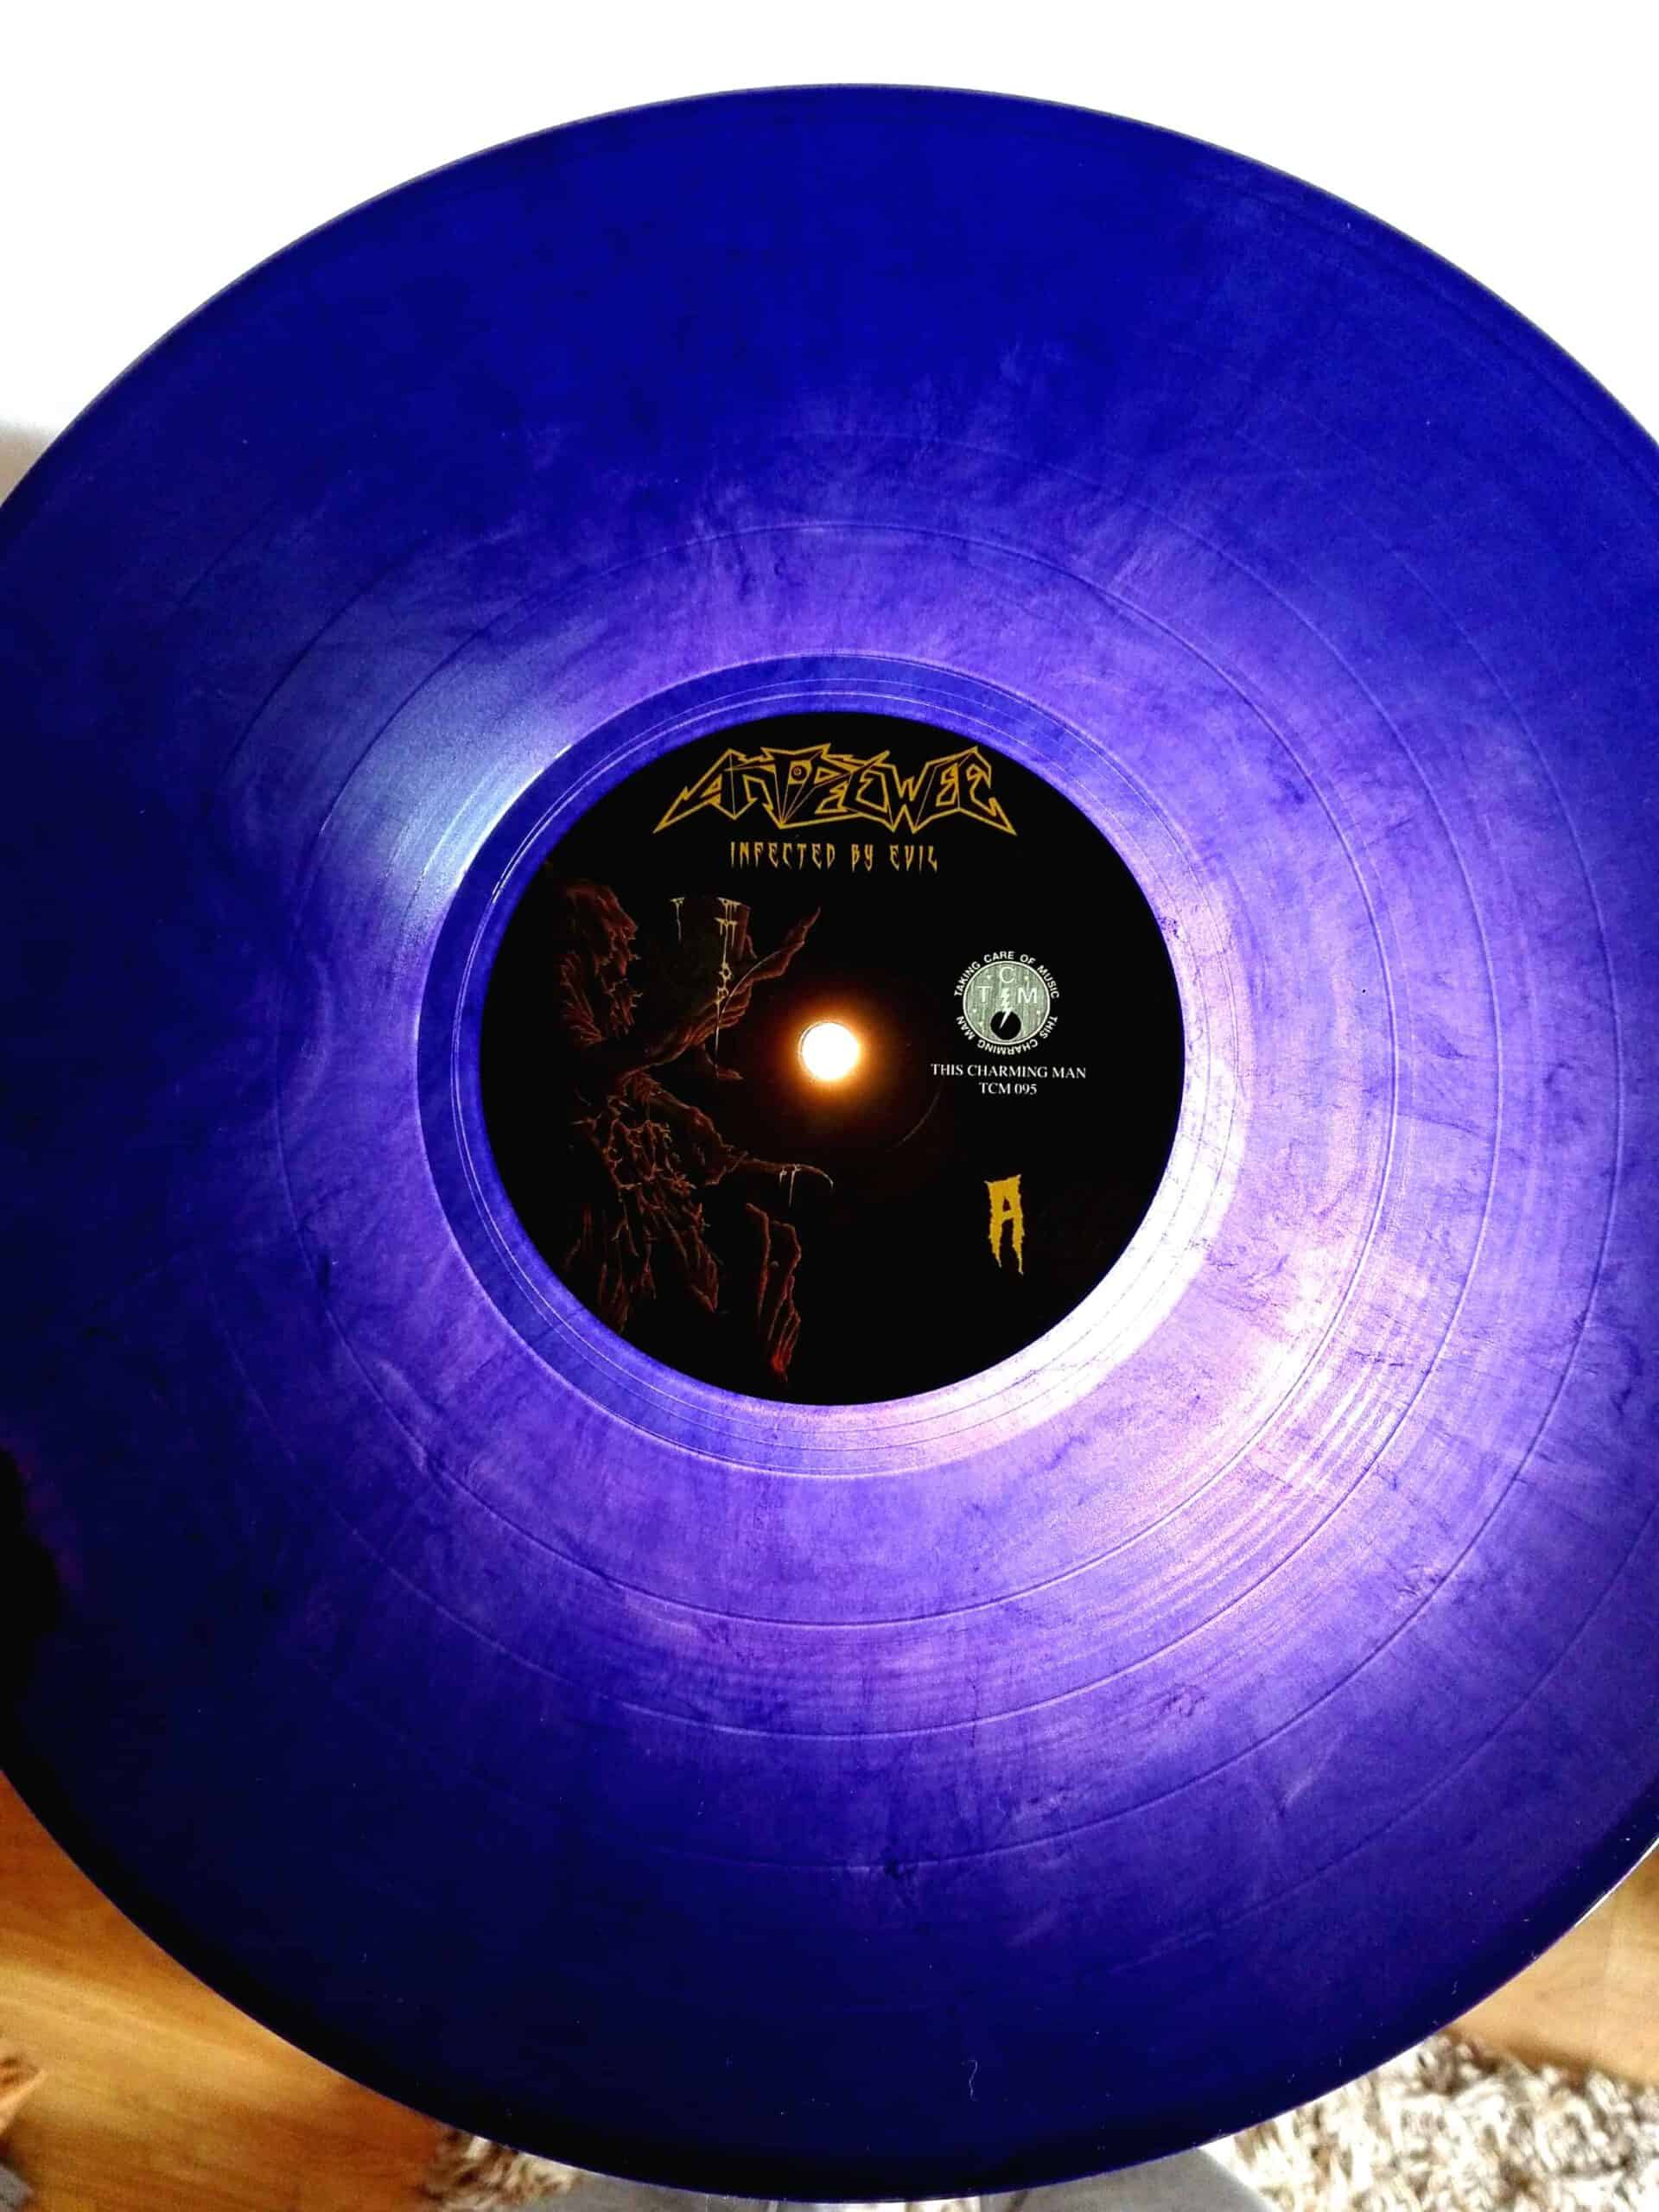 Antipeewee – Infected by Evil LP/CD 100x clear yellow, 400x clear purple w/ black smoke